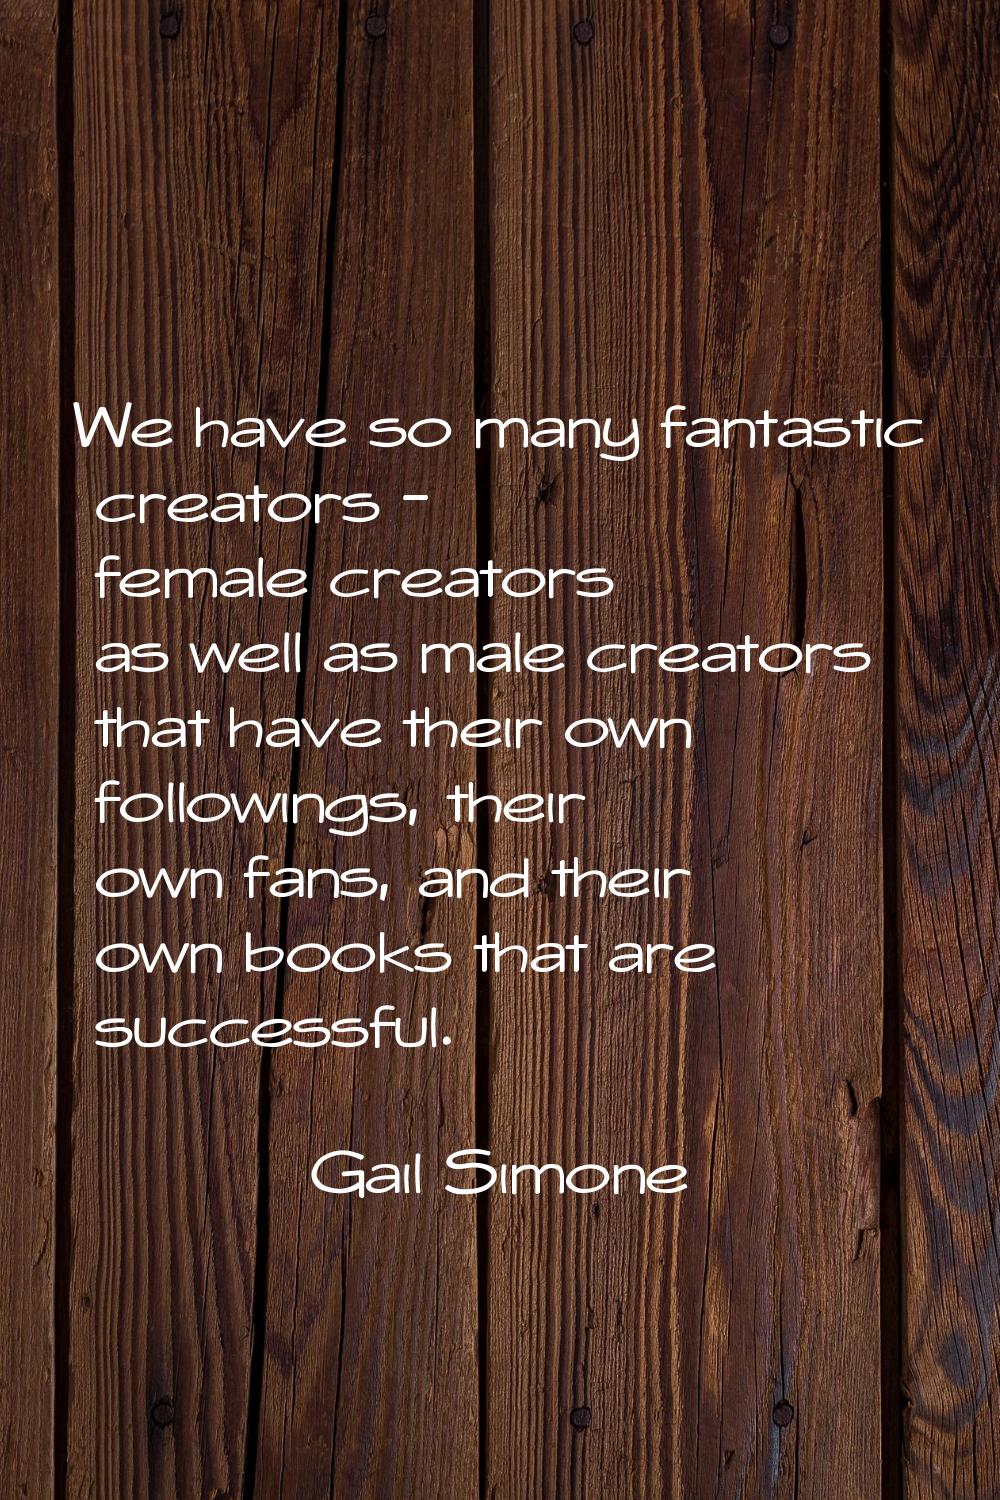 We have so many fantastic creators - female creators as well as male creators that have their own f